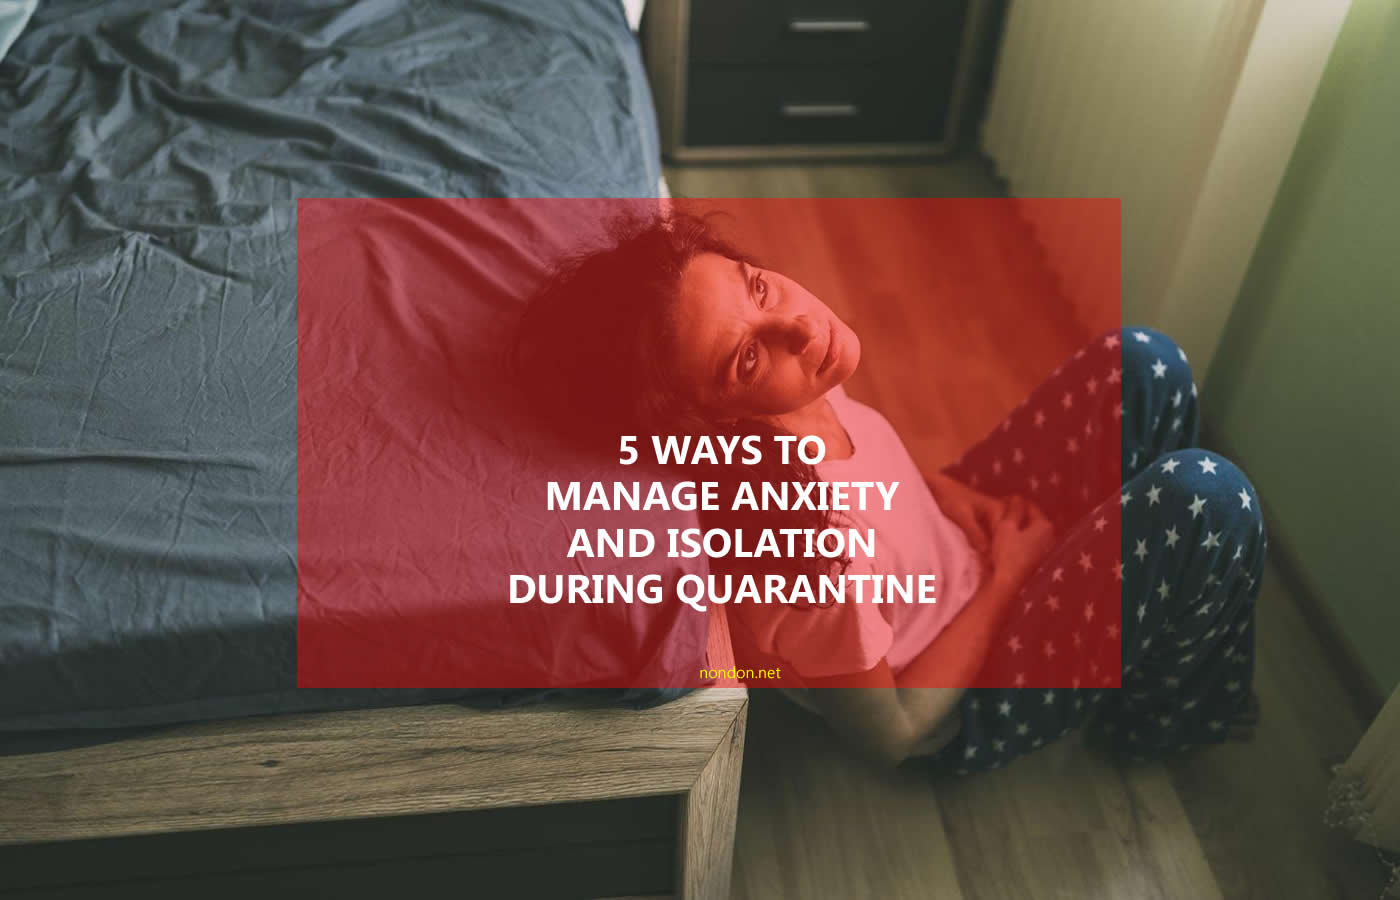 5 Ways to Manage Anxiety and Isolation during Quarantine